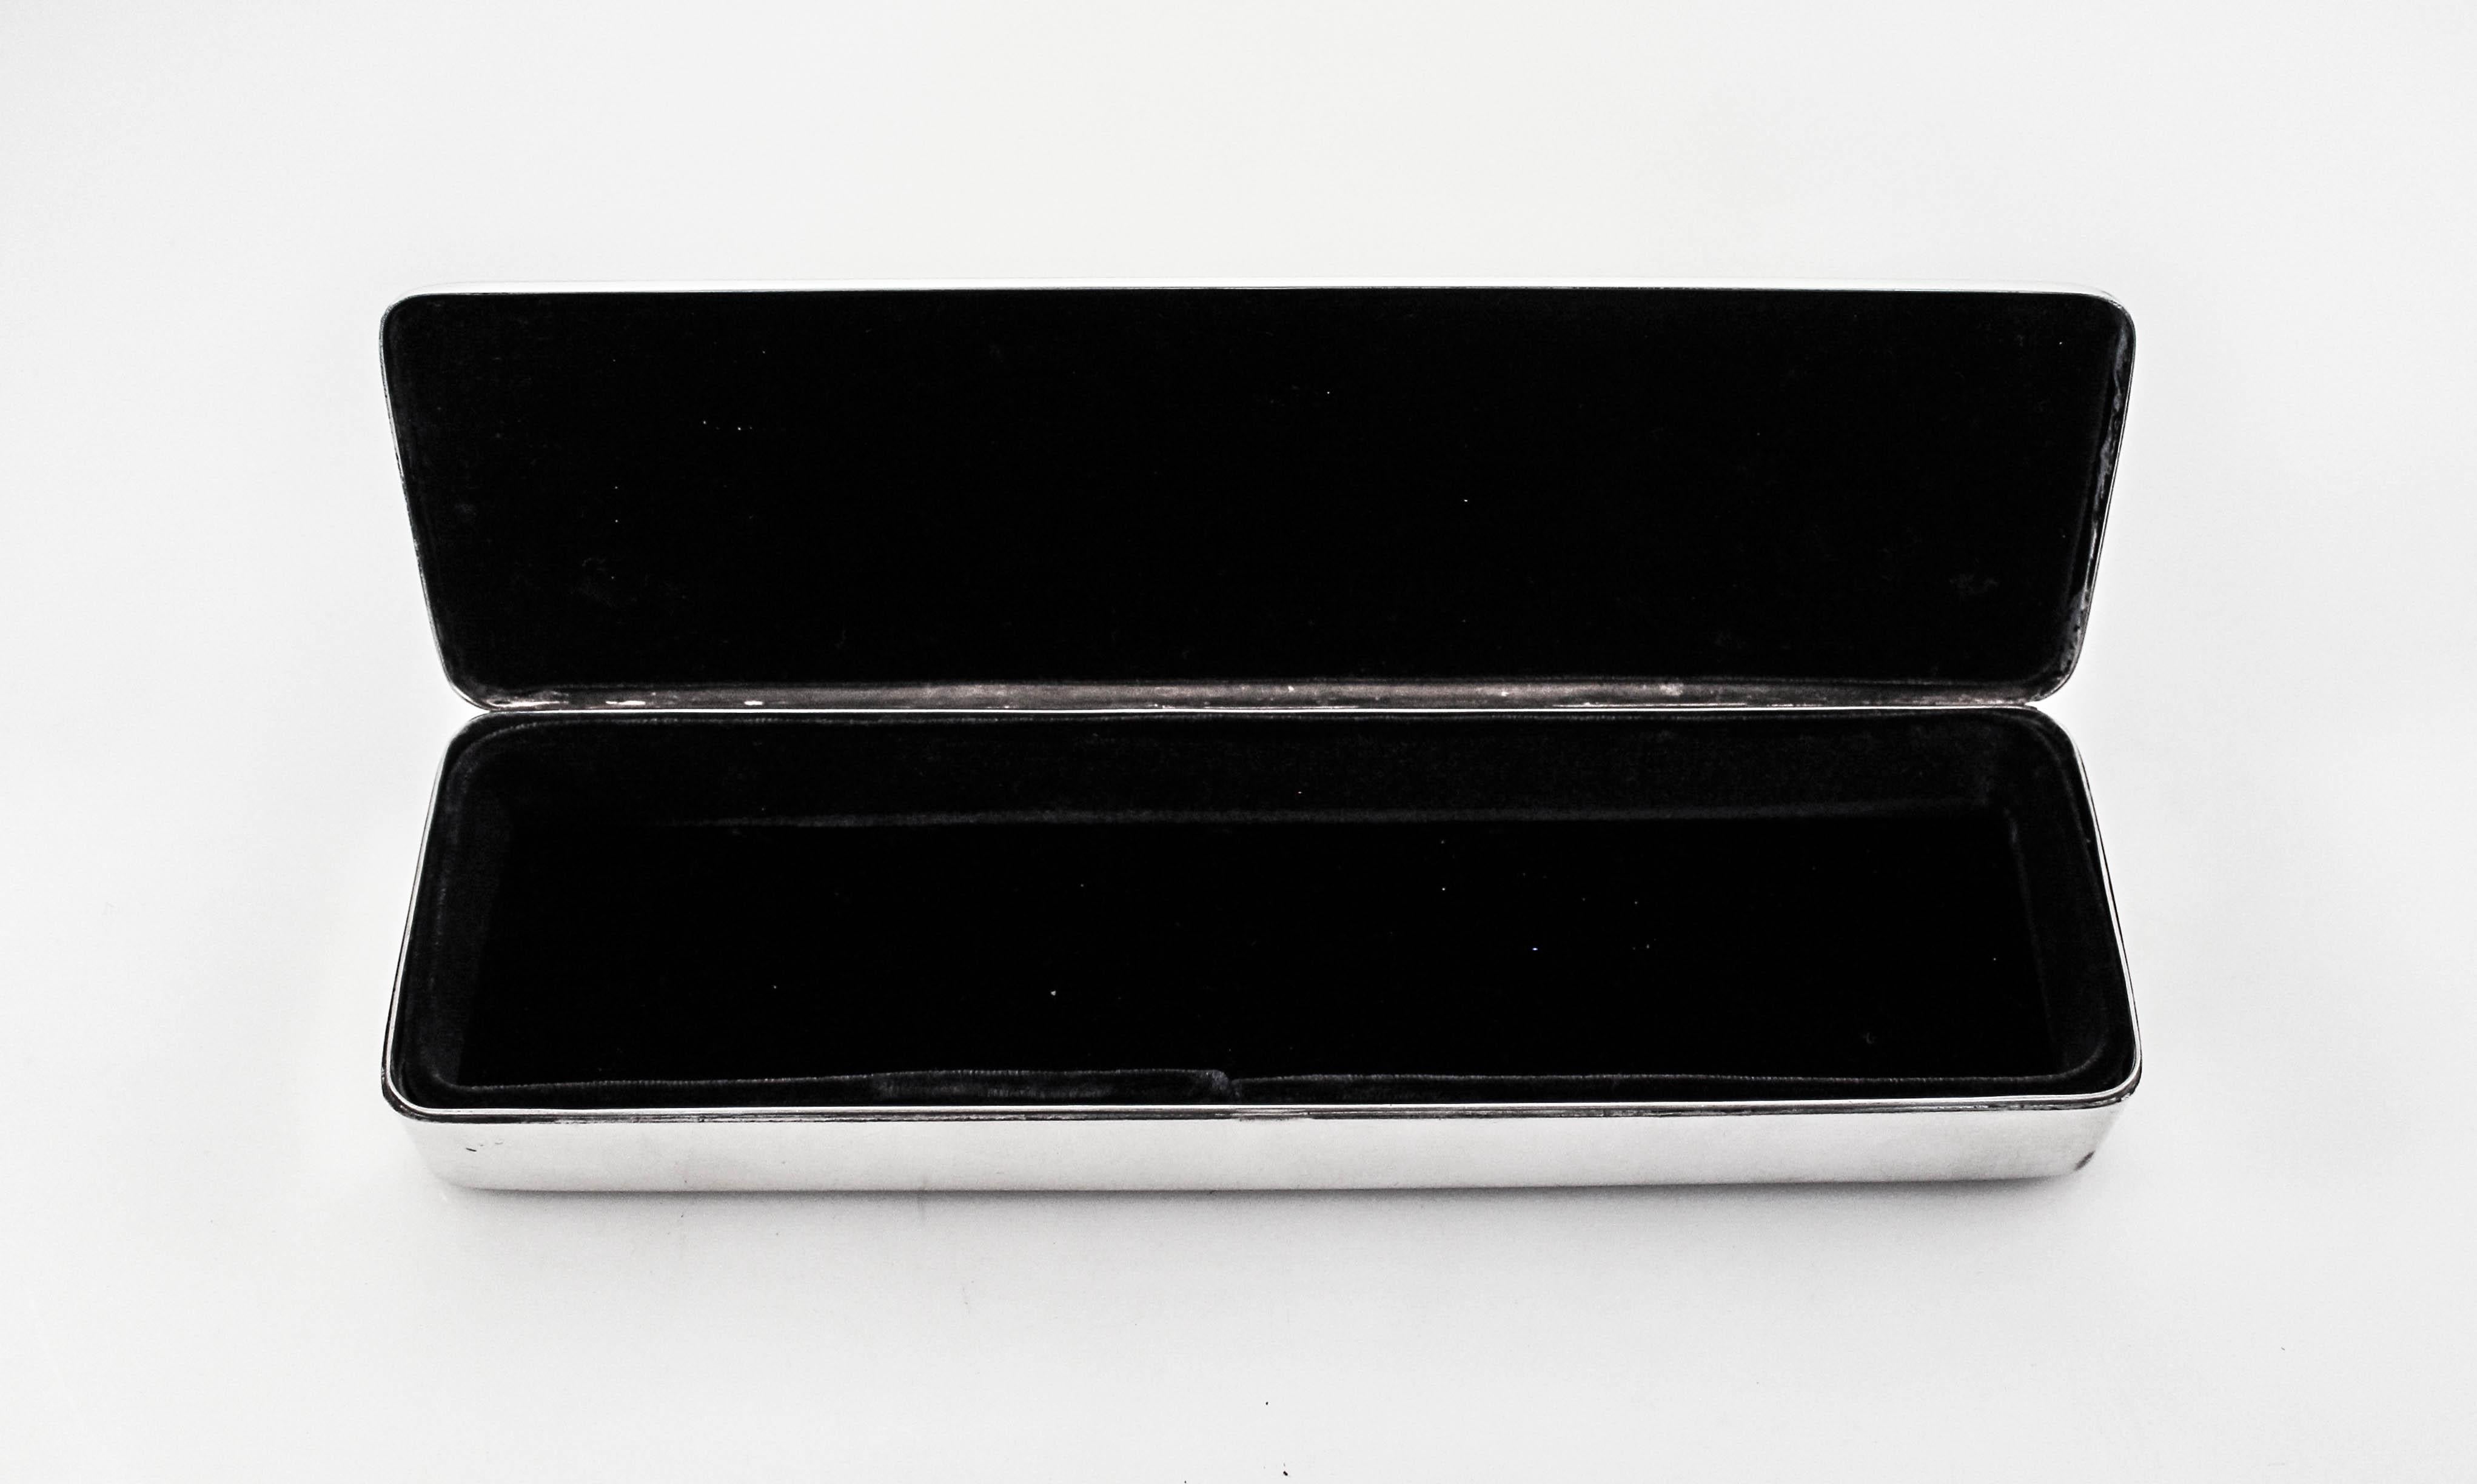 We are pleased to offer this sterling silver jewelry box by Reed & Barton. Dating back to the 1950s, this midcentury piece is exquisite. Uber-sleek and clean it’s all about the curves and shape. We had the inside re-lined in velvet dark blue, that